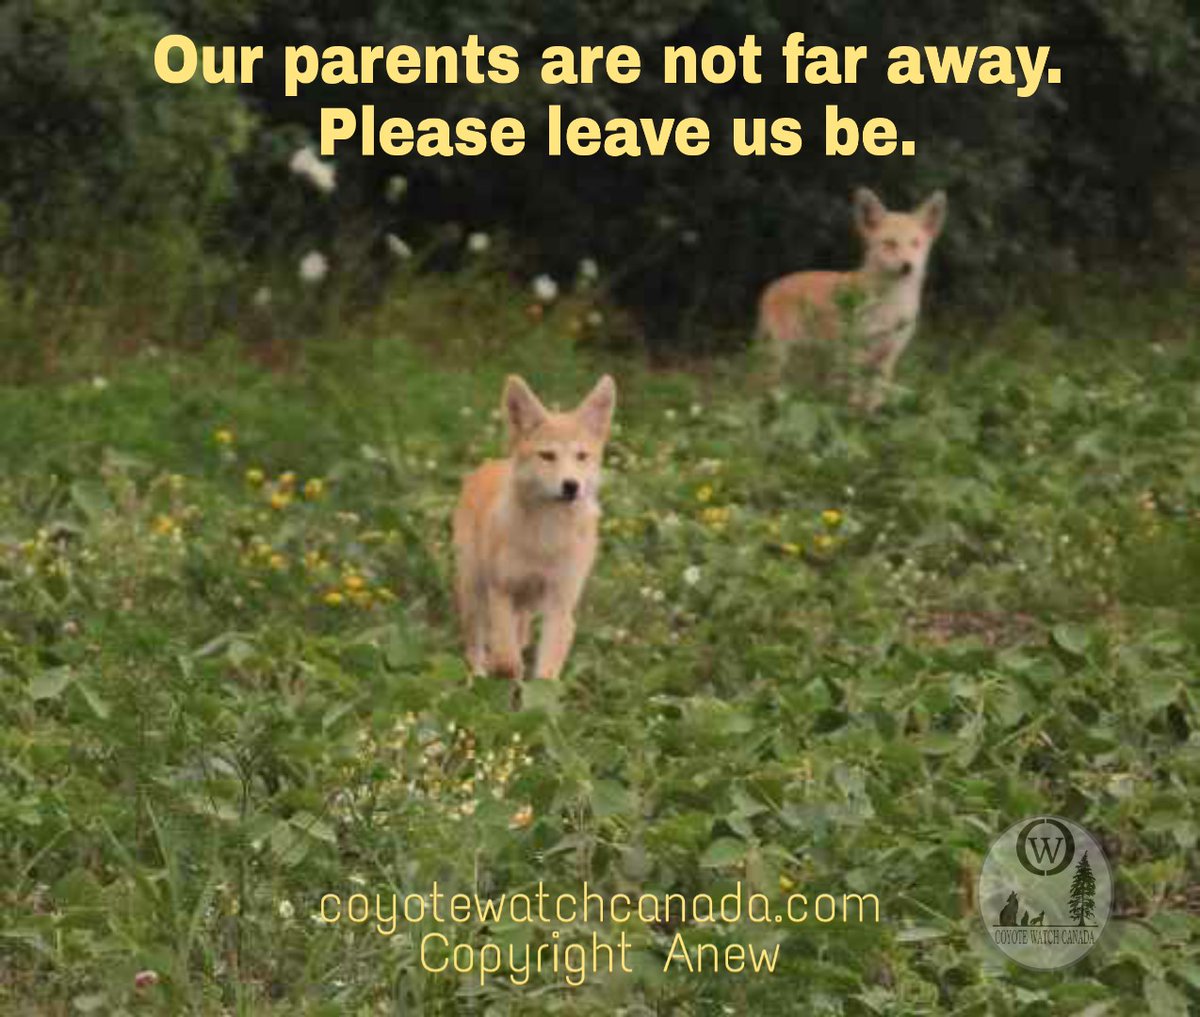 'Our parents are not far away. Please leave us be.'
Coyote parents do not abandon their pups. This is a myth. Pure misinformation & misleading people away from the wonderful qualities coyotes have. facebook.com/19072589427352…
#pupseason #pups #coexistence #coyotes #donotfeedwildlife